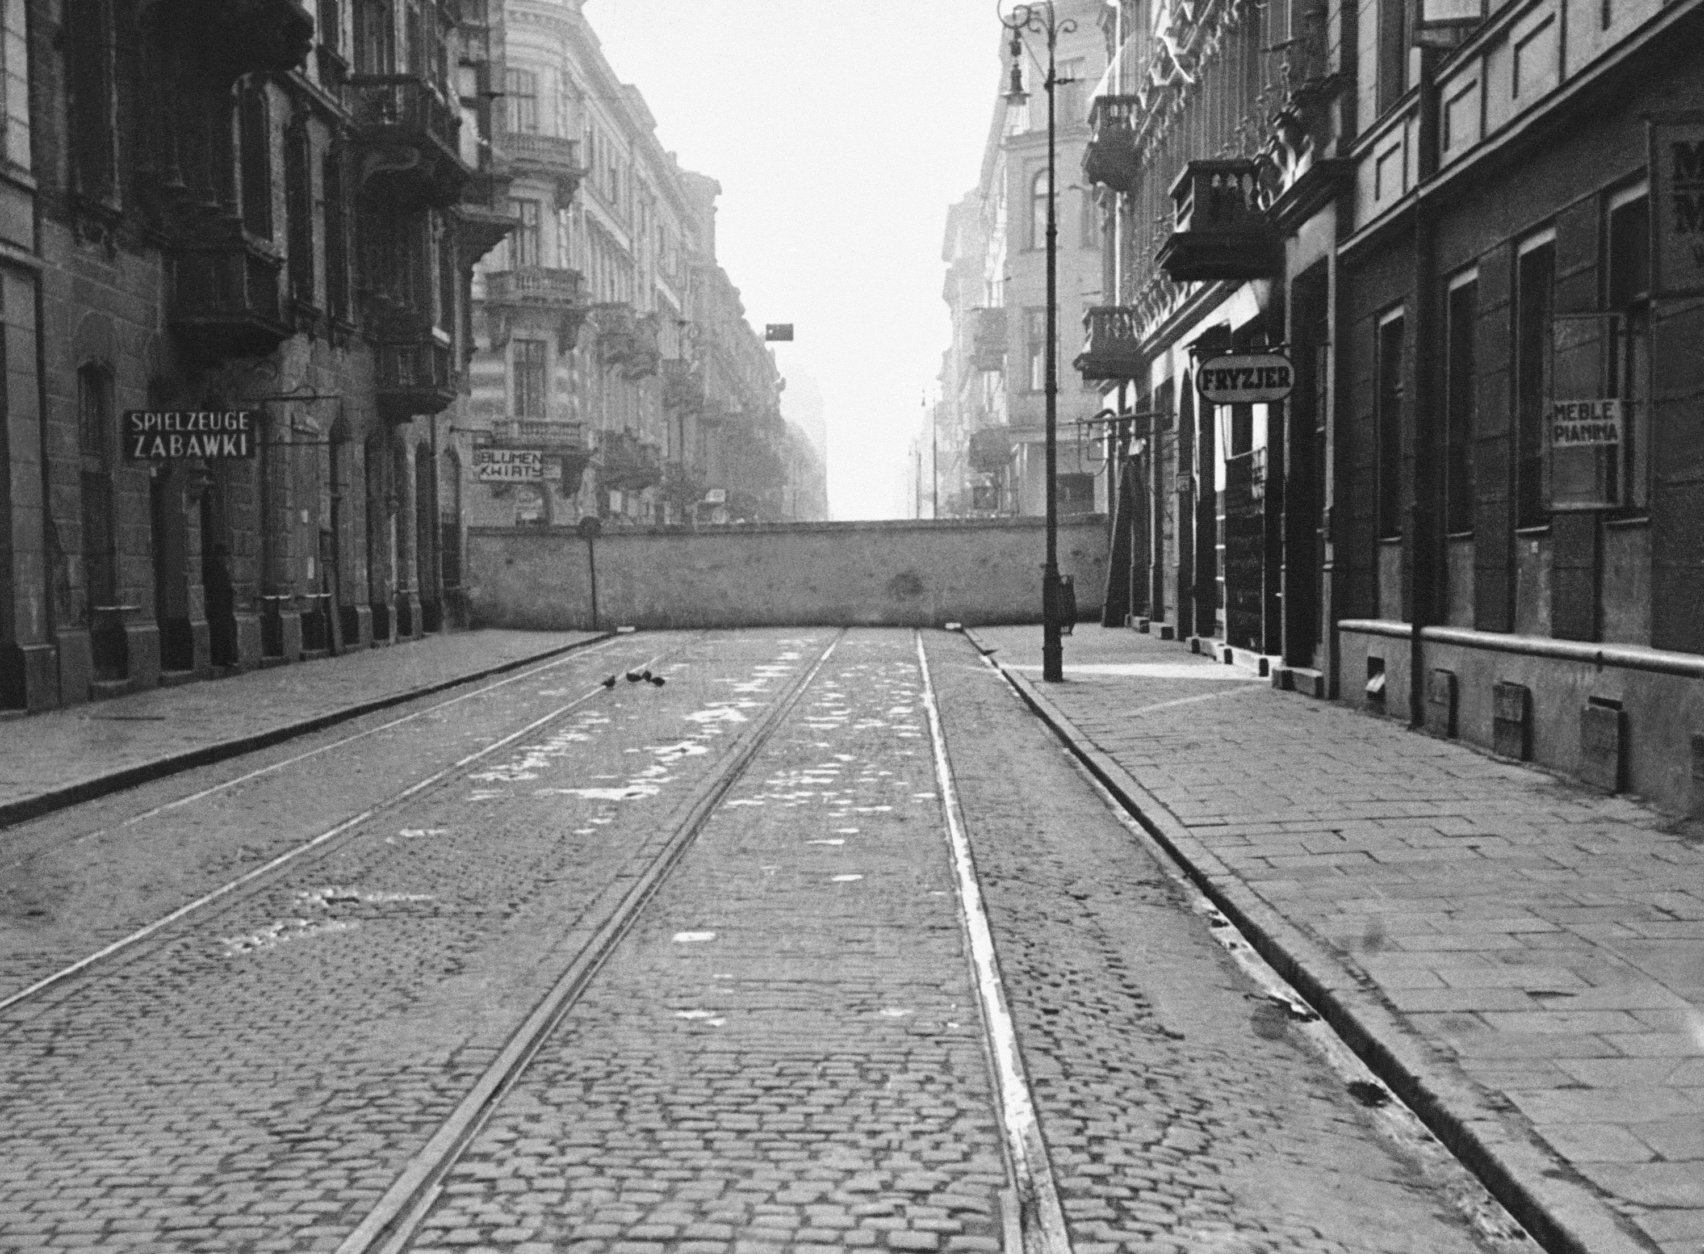 A wall of the Warsaw Ghetto cuts across a street in central Warsaw, Poland, on Dec. 20, 1940. The ghetto, built by the Nazis in 1940 as a pen for Warsaw's approximately 500,000 Jews, was enclosed by red brick and grey stone walls more than 10 feet high, topped with barbed wire, and enclosing an area of about 1.3 square miles (3.4 square km), roughly the size New York's Central Park. (AP Photo/Alvin Steinkopf)